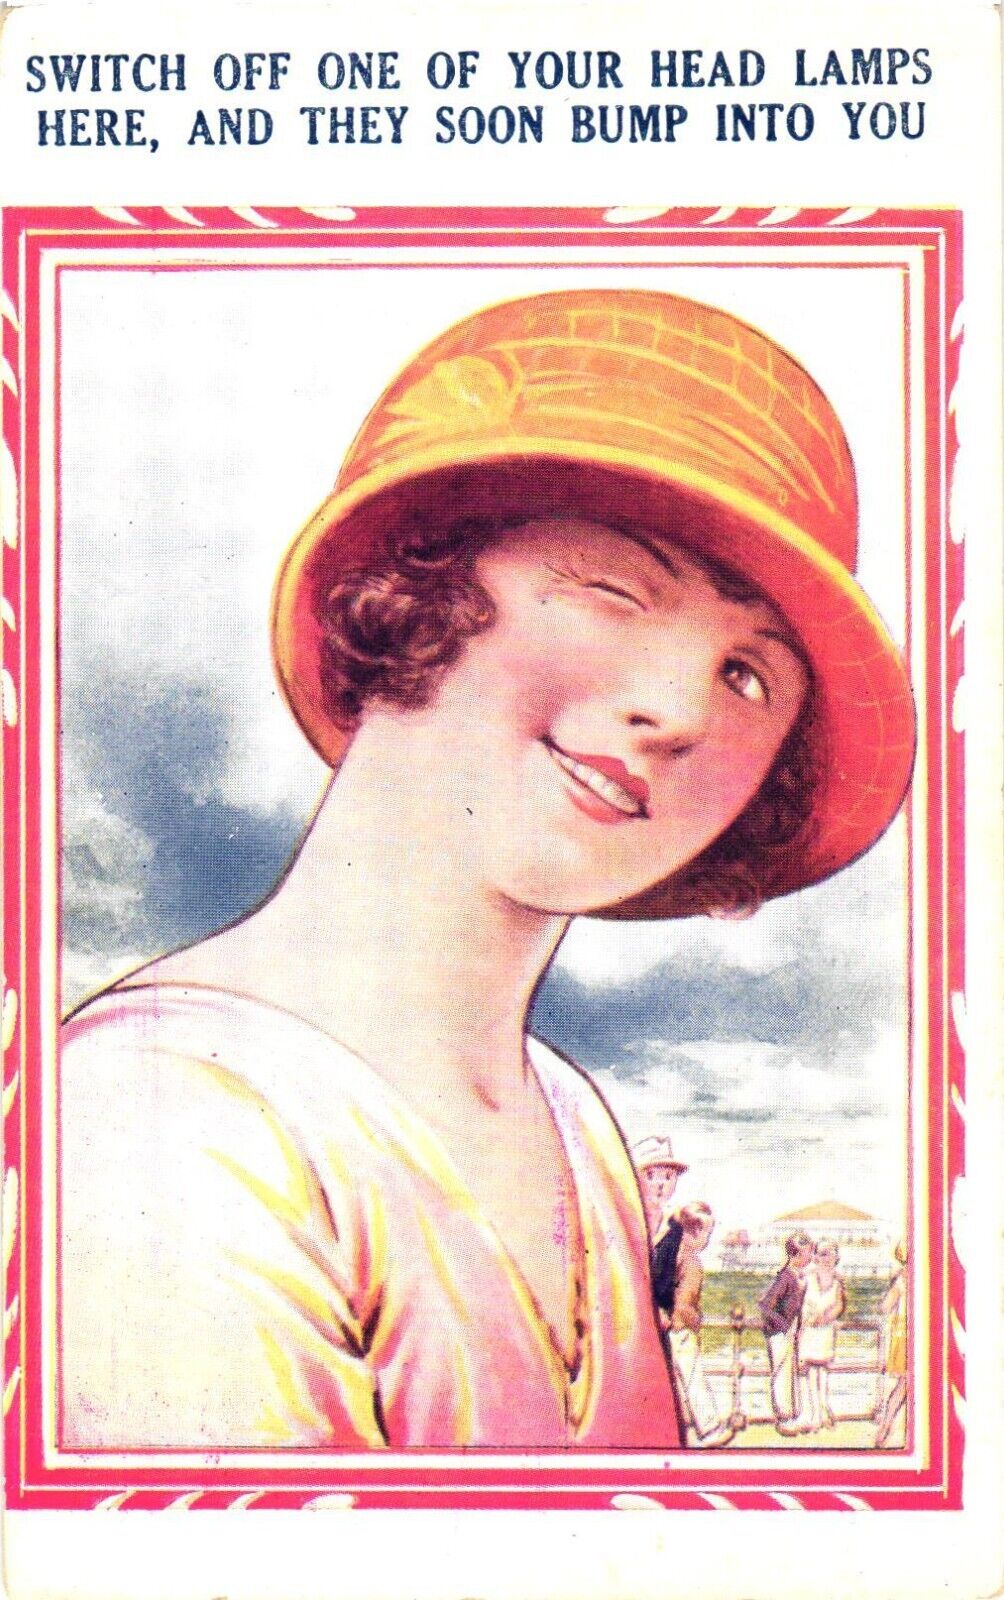 Beautiful Woman Winking, Switch Off One of Your Head Lamps Here Postcard